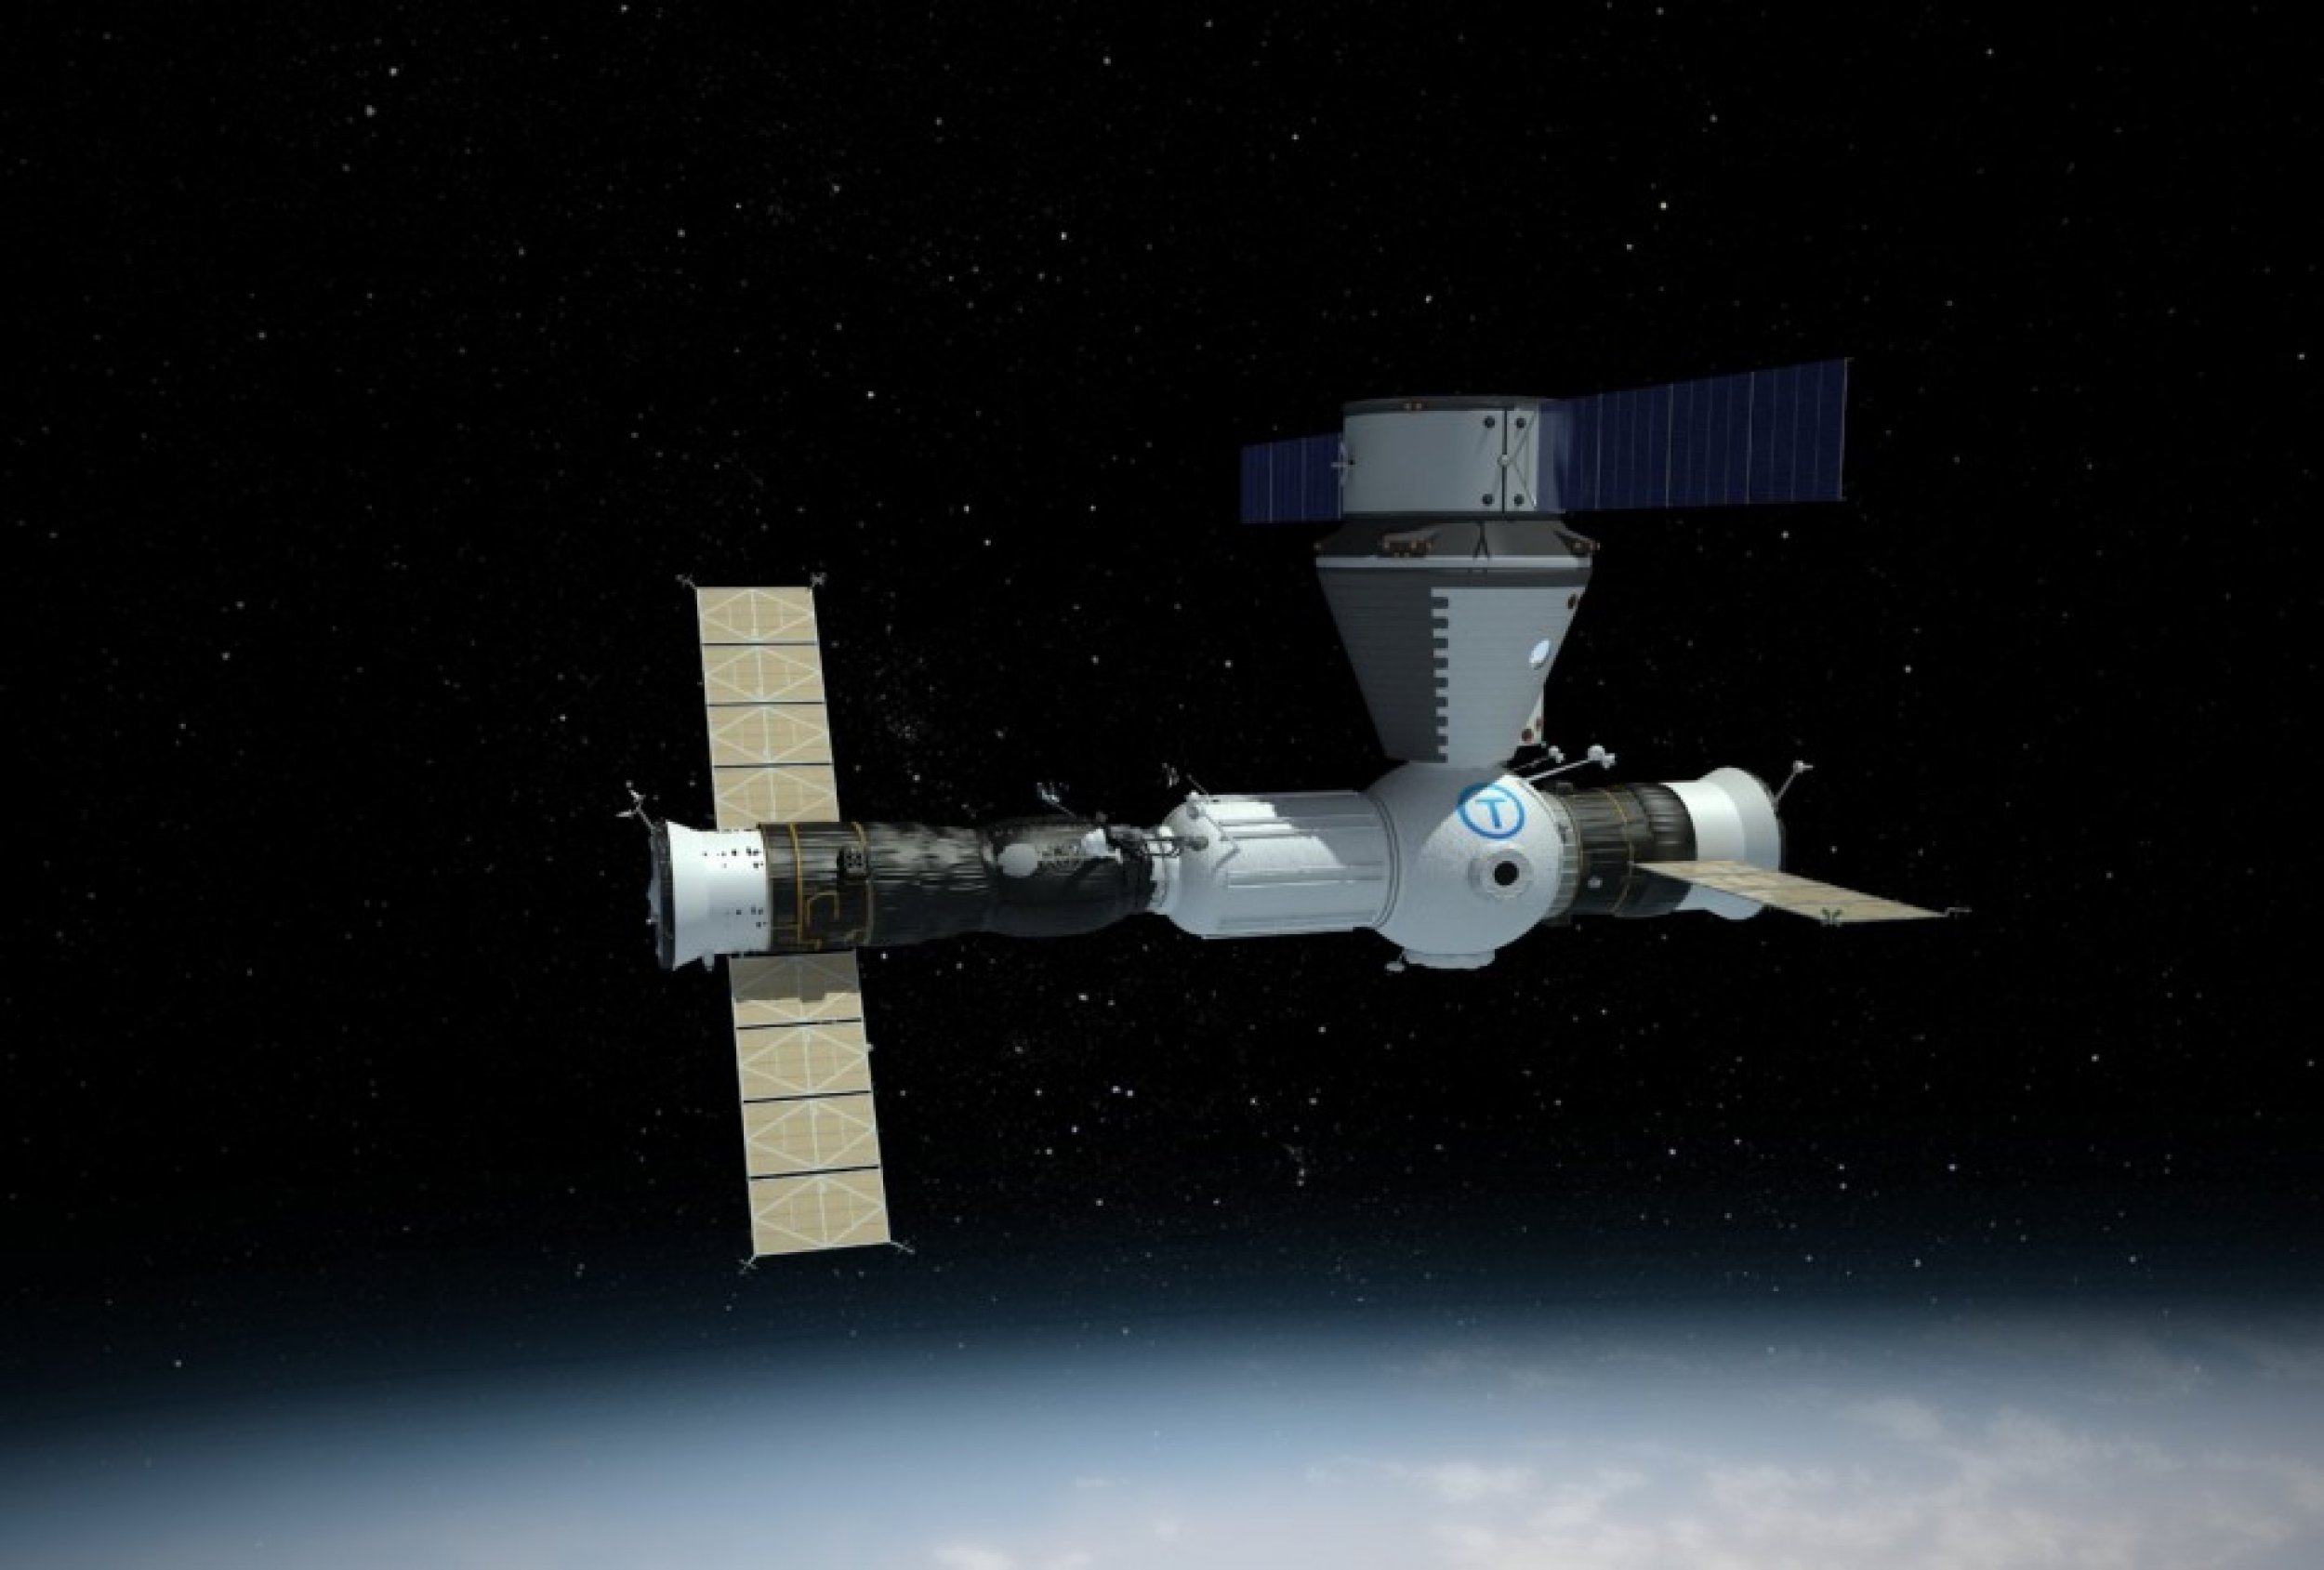 The Commercial Space Station